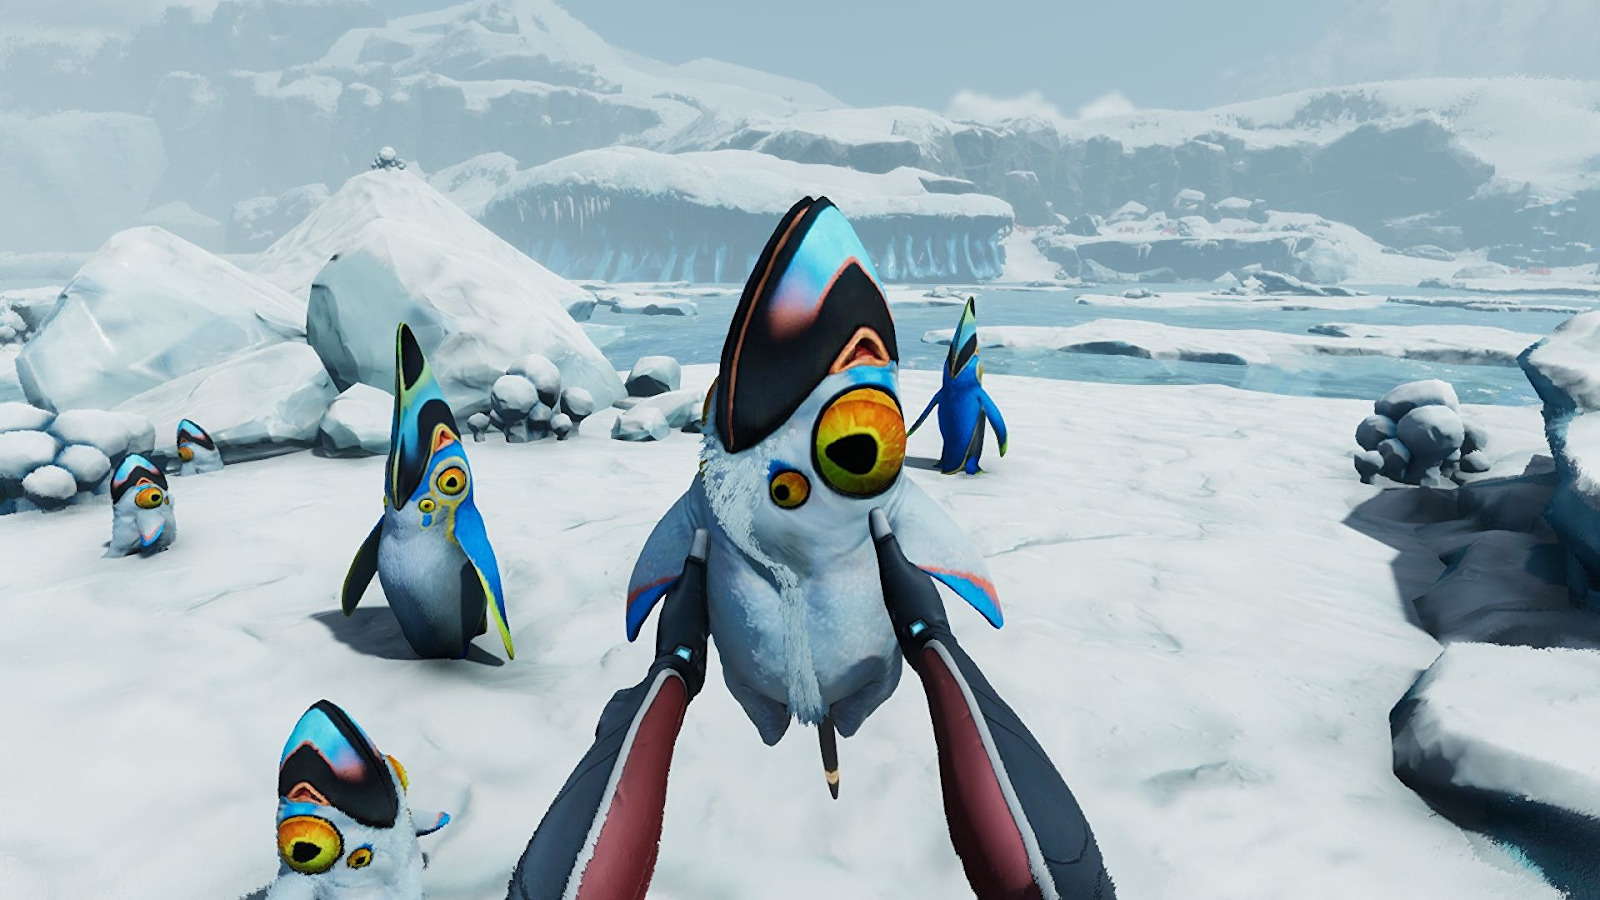 subnautica-below-zero-launches-as-a-full-game